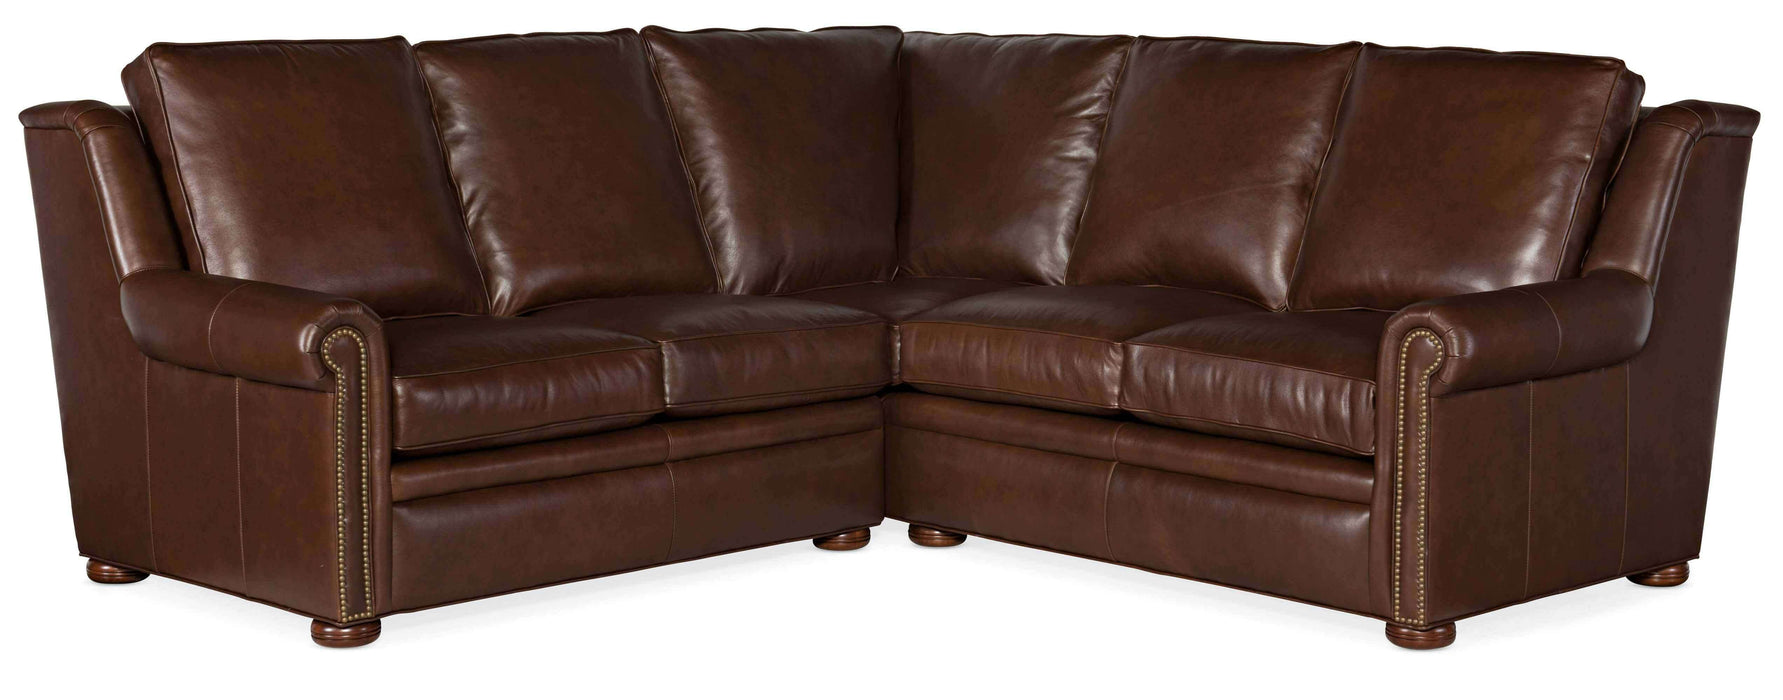 Reece Leather Power Reclining Sectional With Articulating Headrest